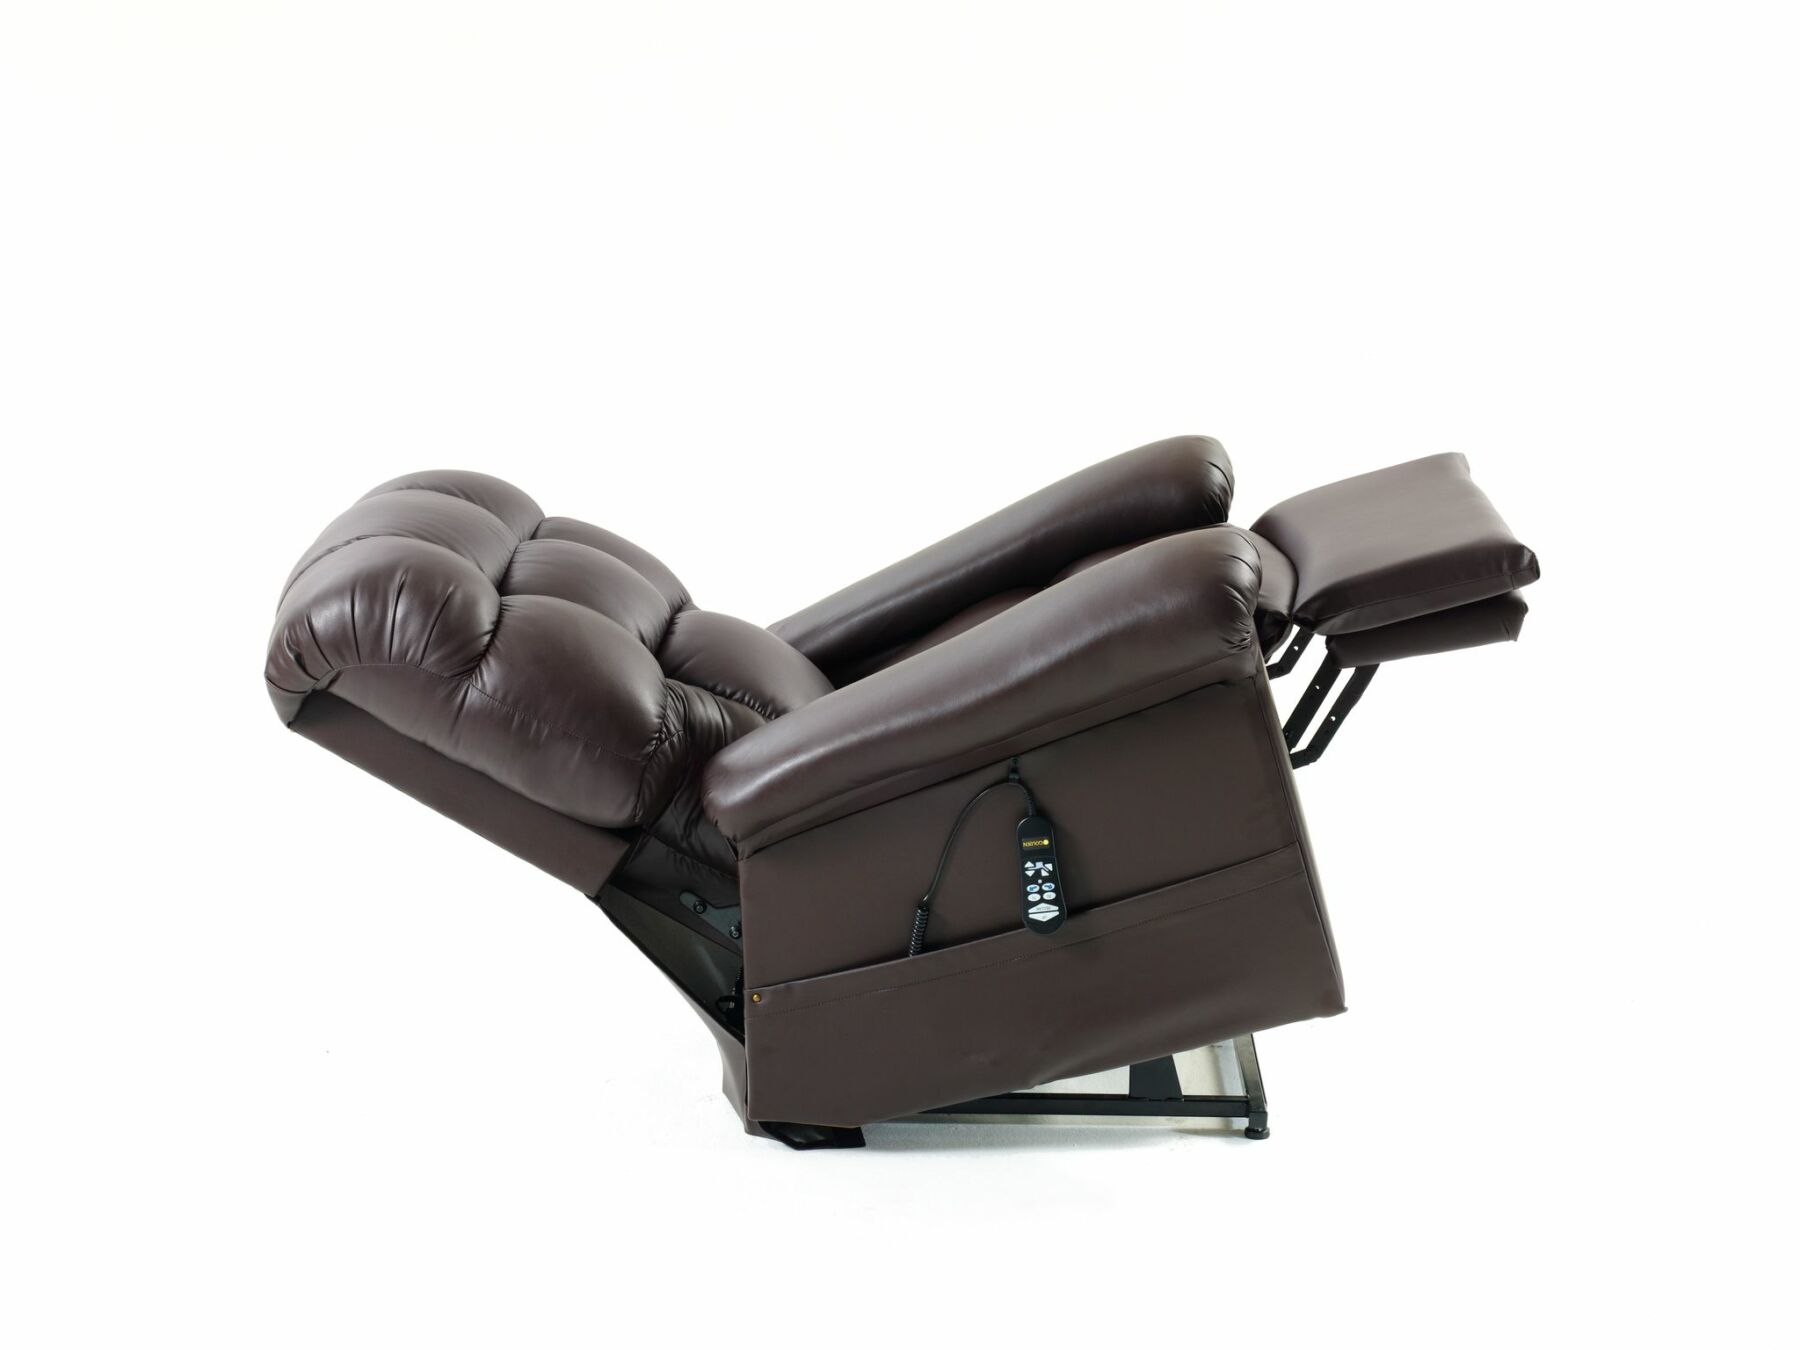 South Gate Twilight Lift Chair Recliner